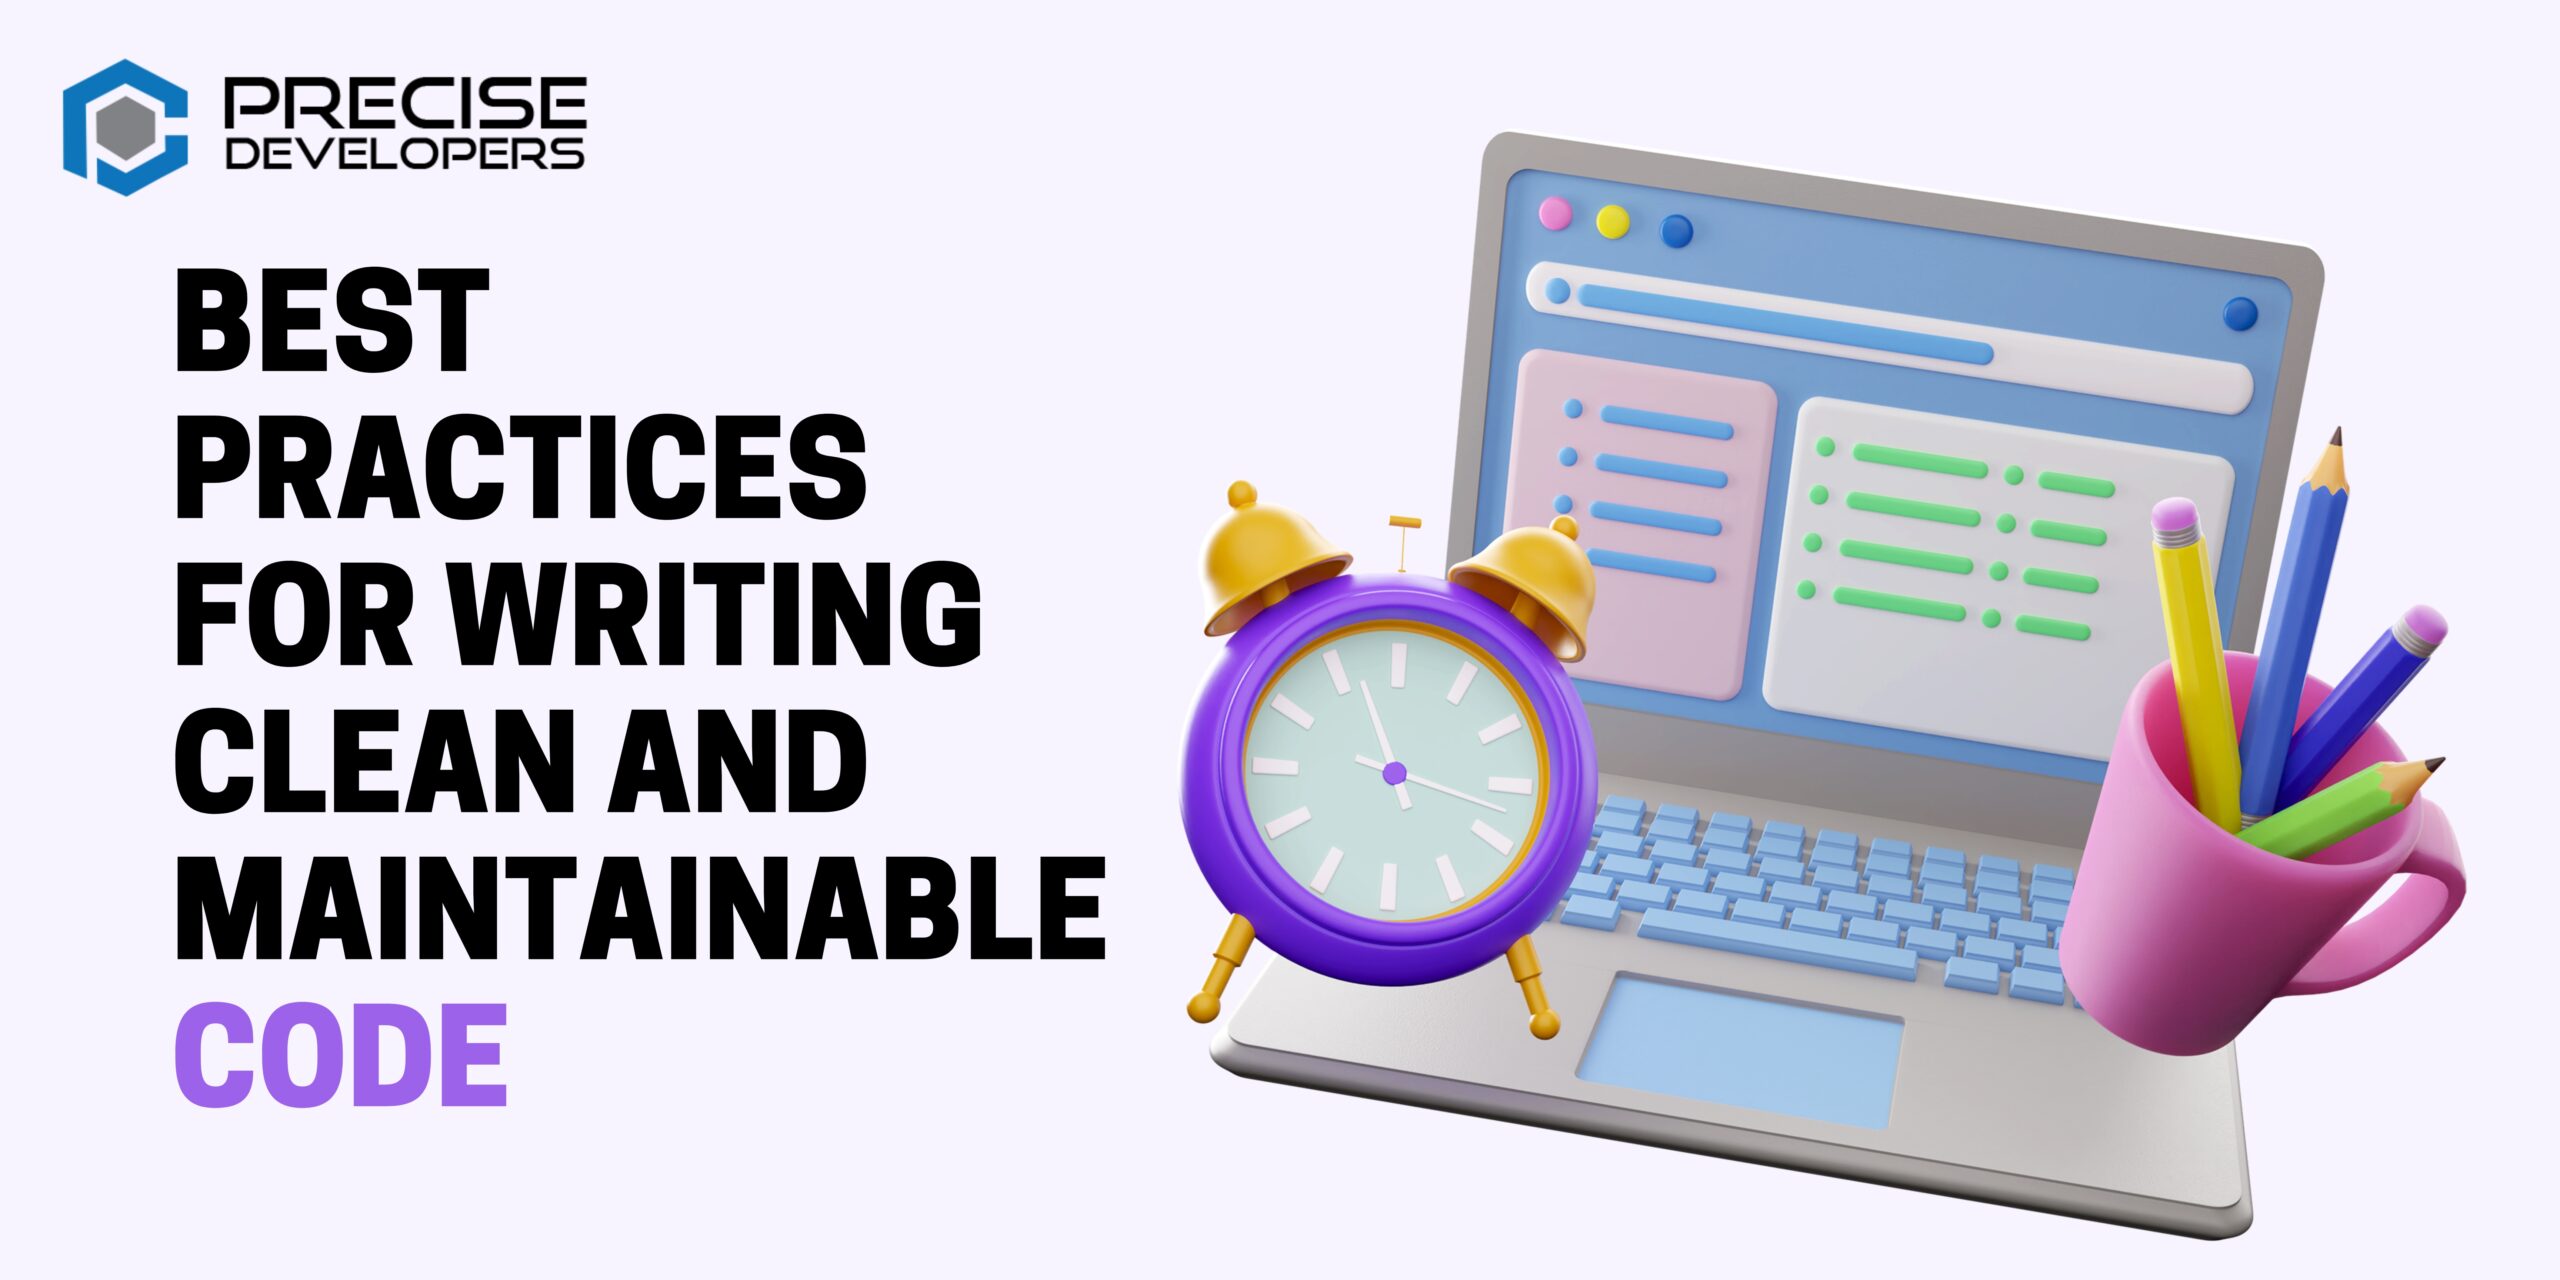 Best practices for writing clean and maintainable code Precise Developers